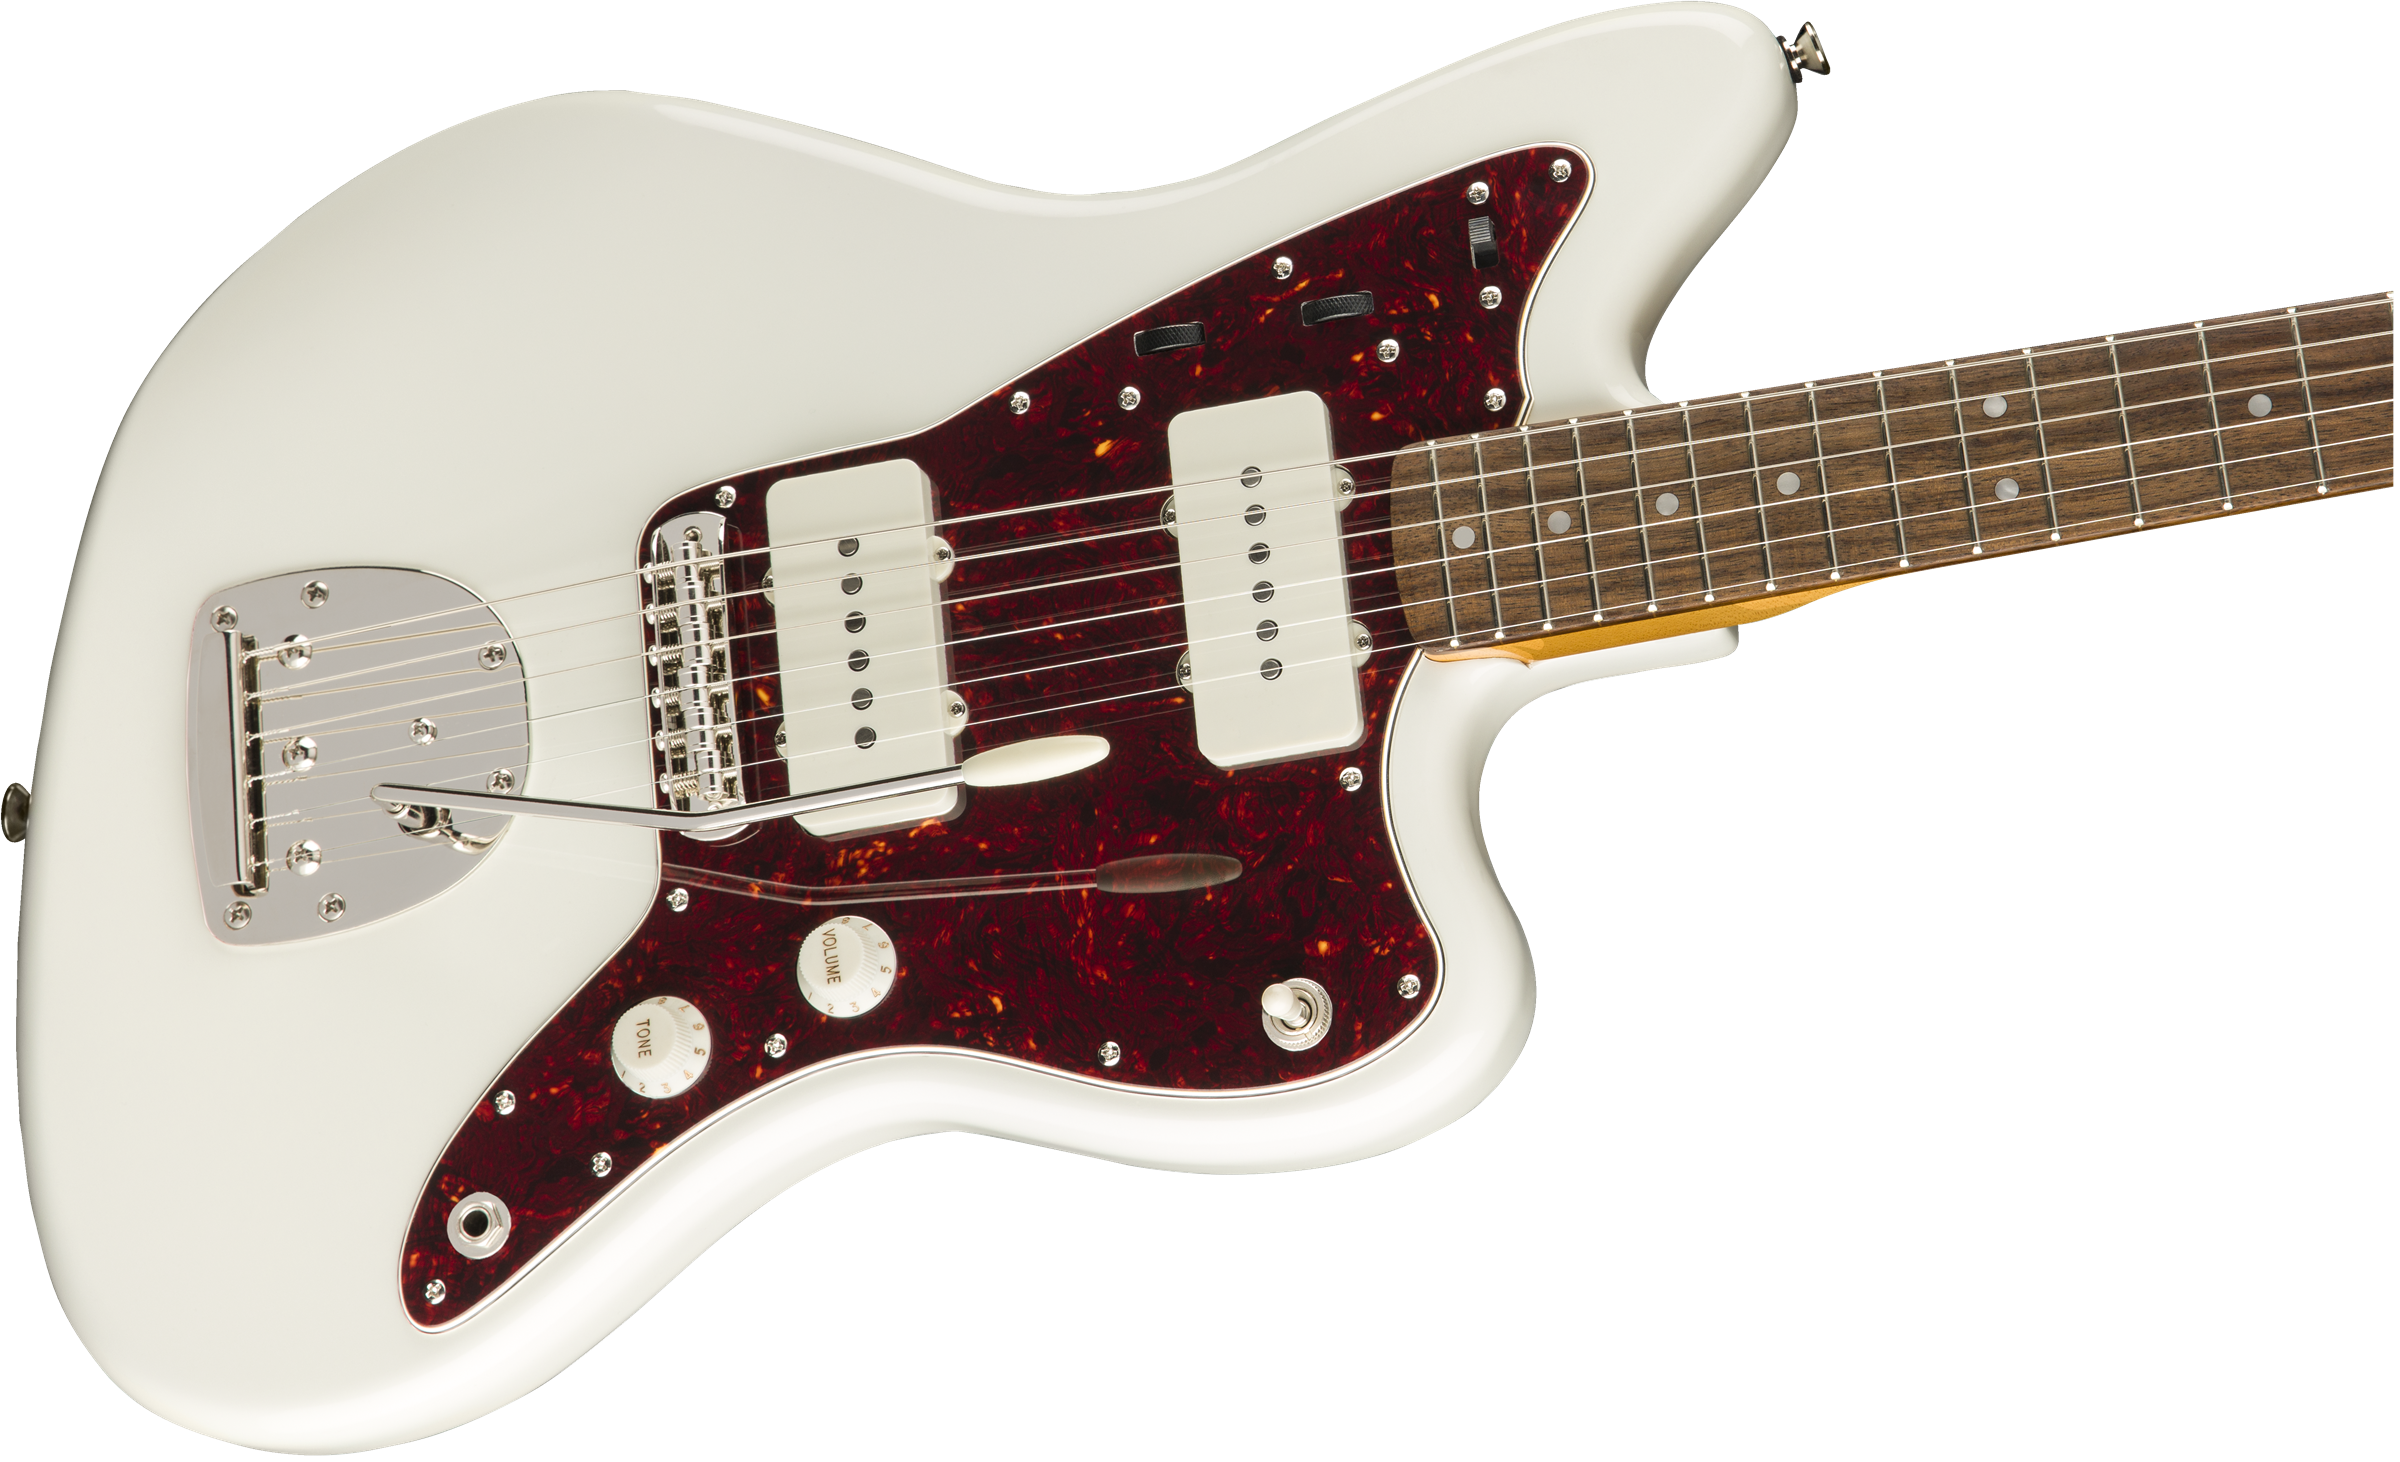 Squier Classic Vibe 60's Jazzmaster Electric Guitar in Olympic White